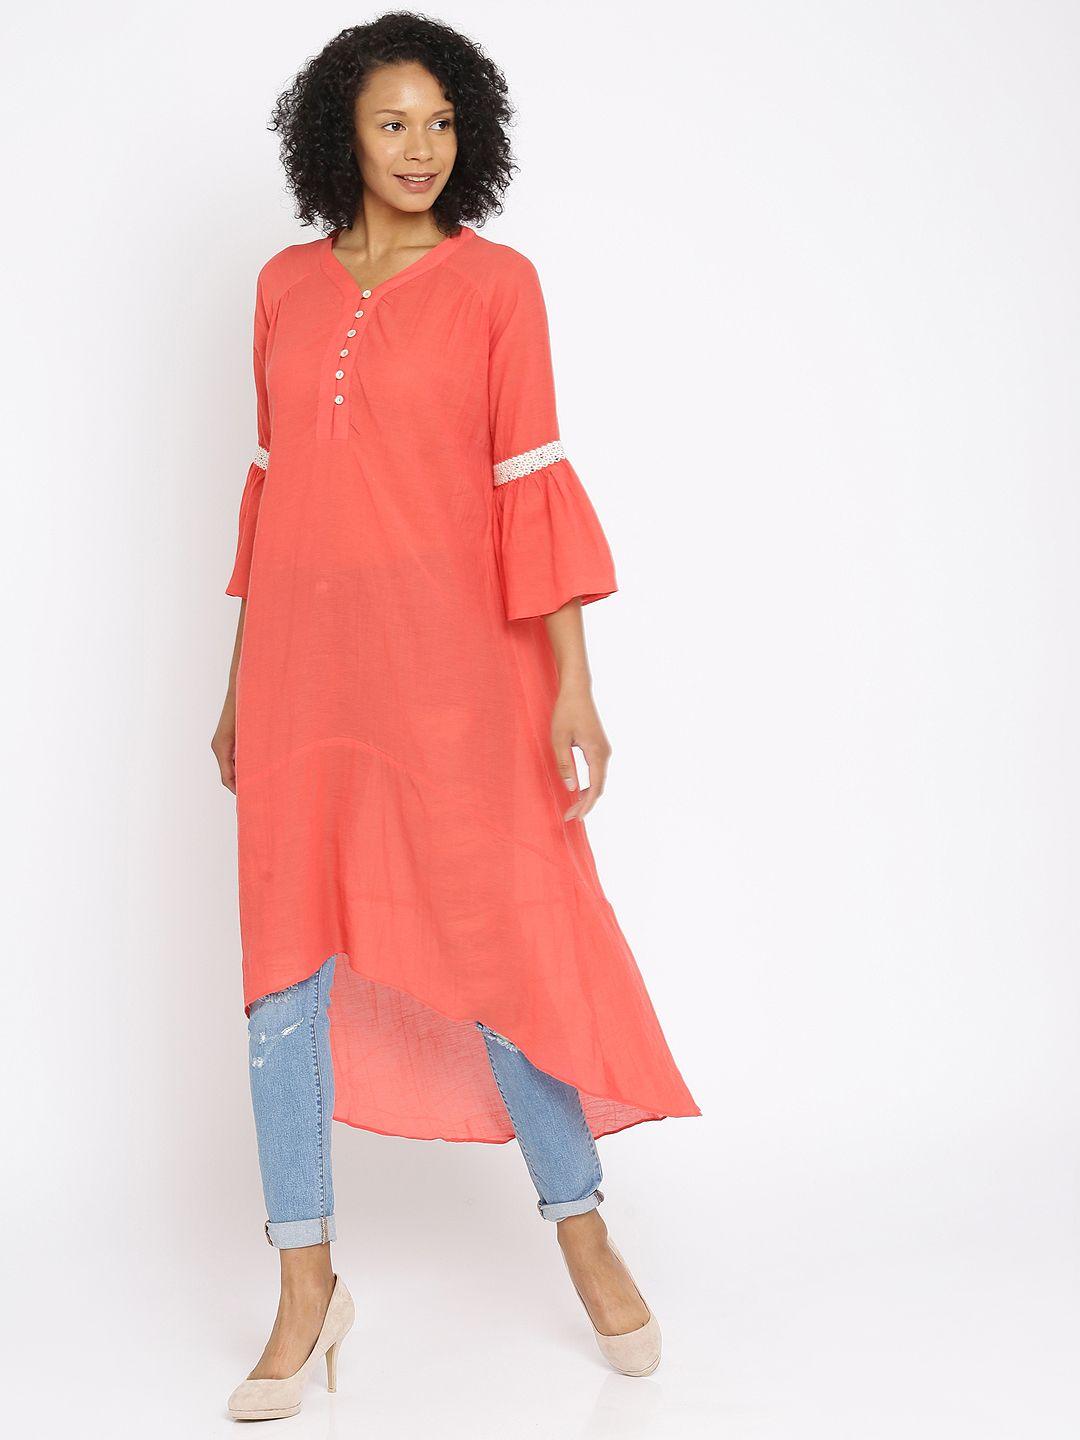 and-coral-pink-sheer-high-low-tunic